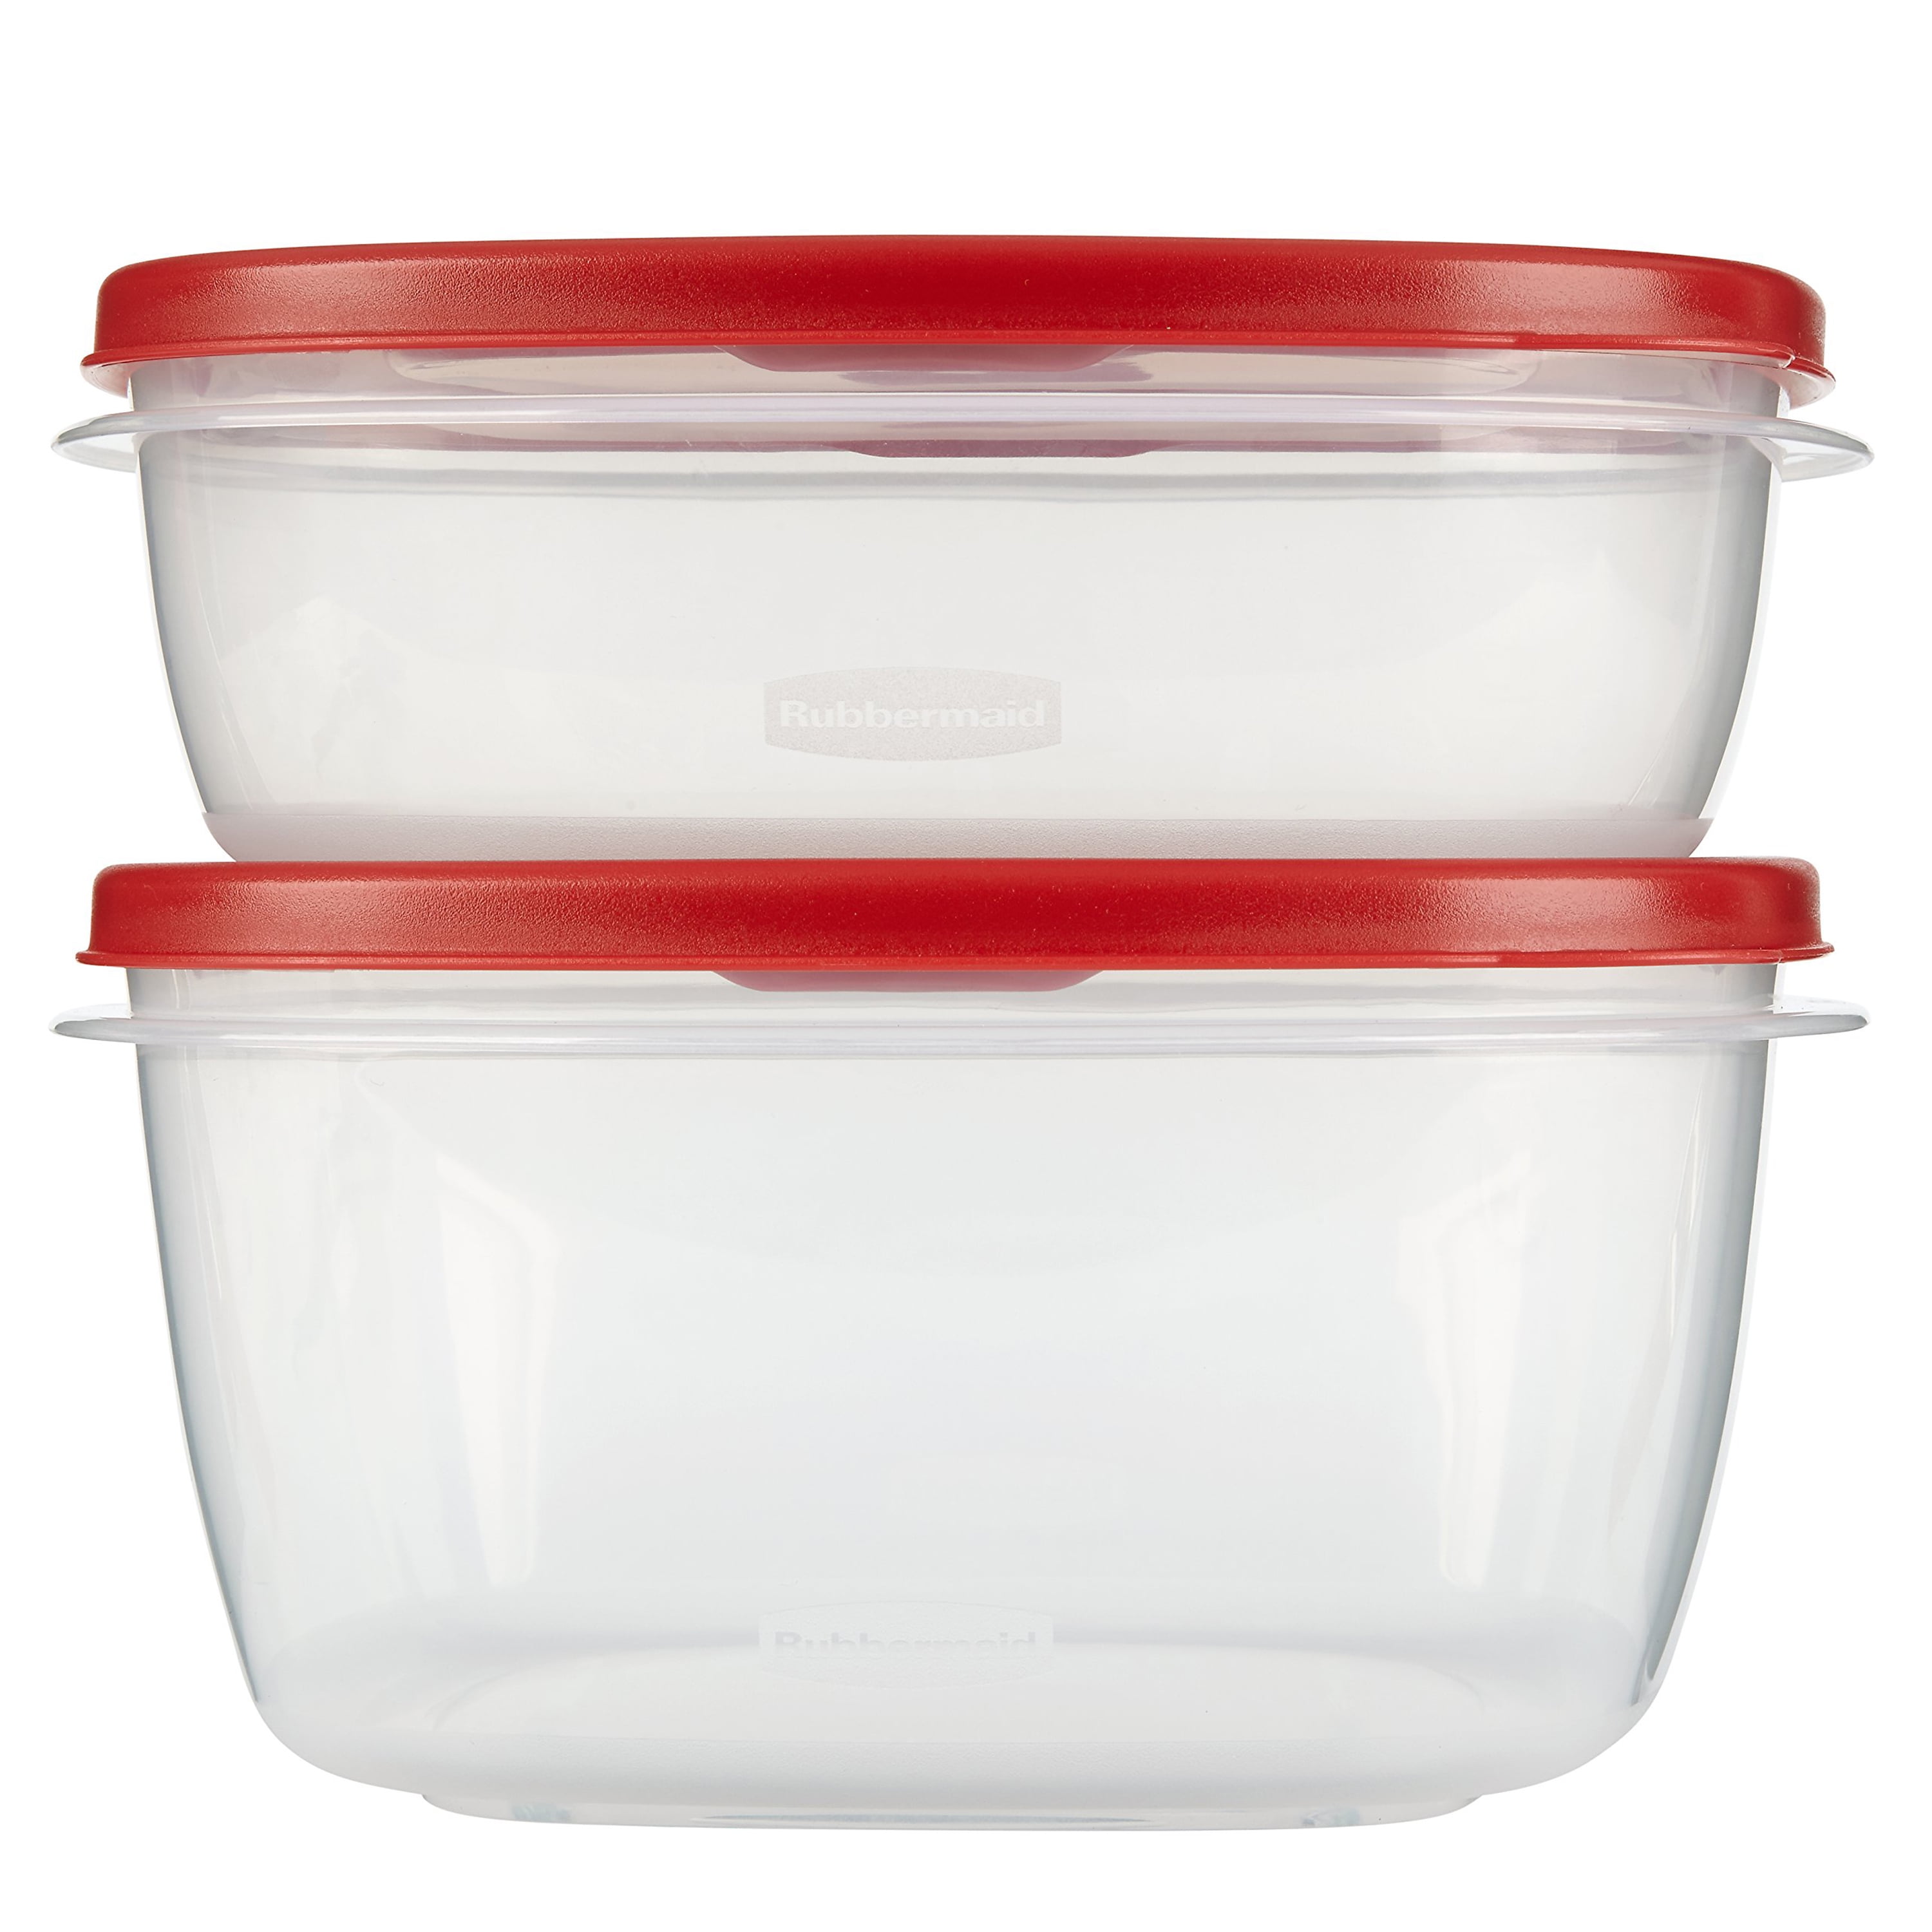 Rubbermaid® Easy-Find Lids Food Storage Container Value Pack - Red/Clear, 2  pc - Food 4 Less